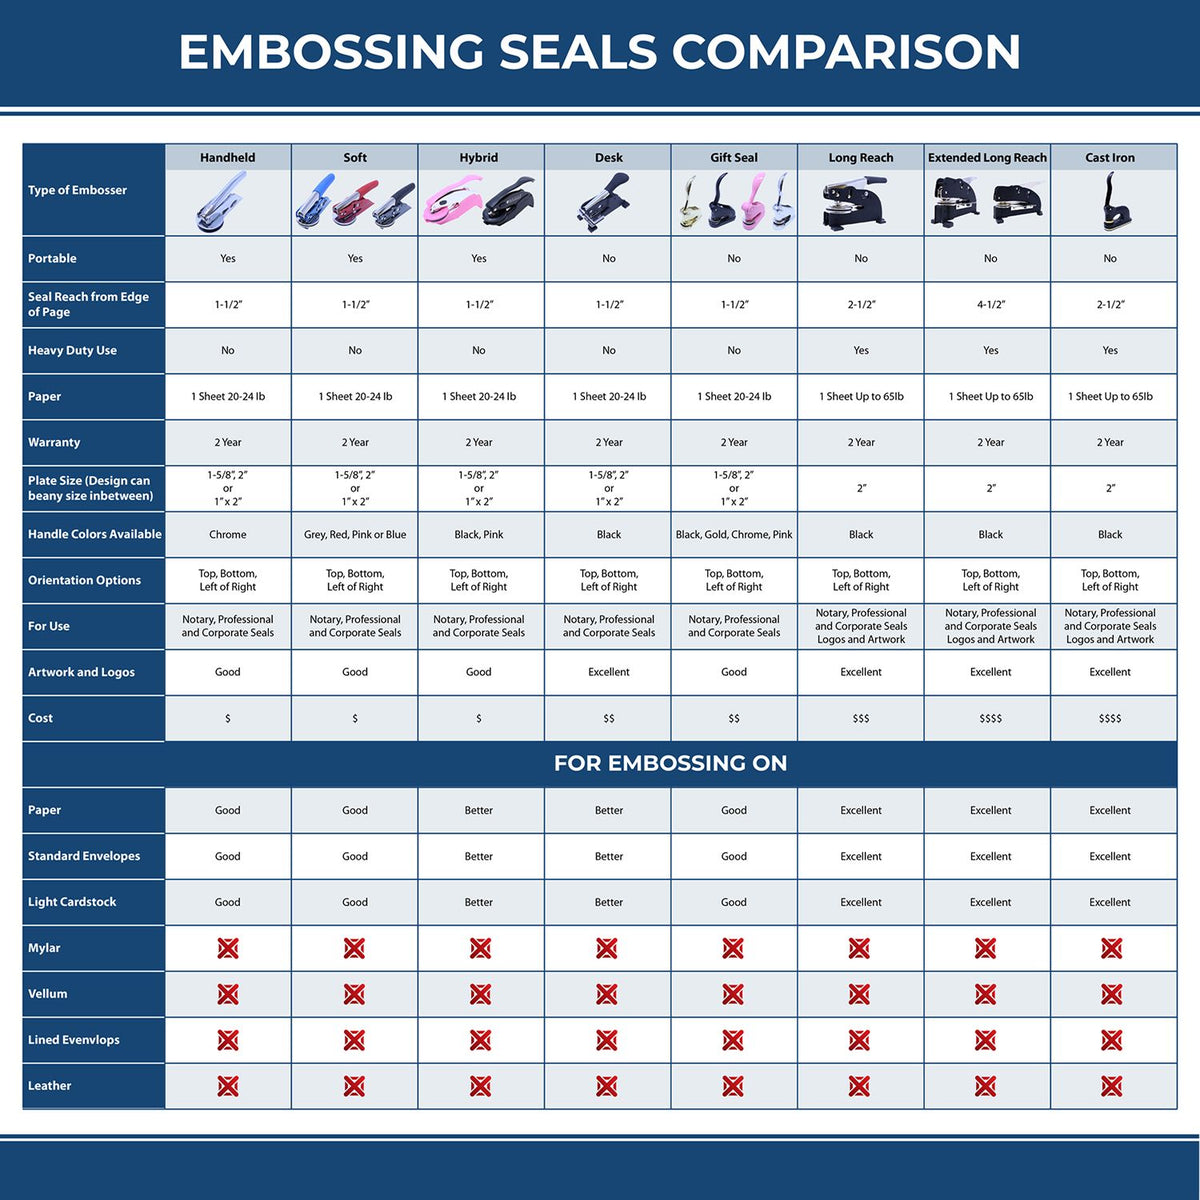 A comparison chart for the different types of mount models available for the State of Missouri Soft Land Surveyor Embossing Seal.